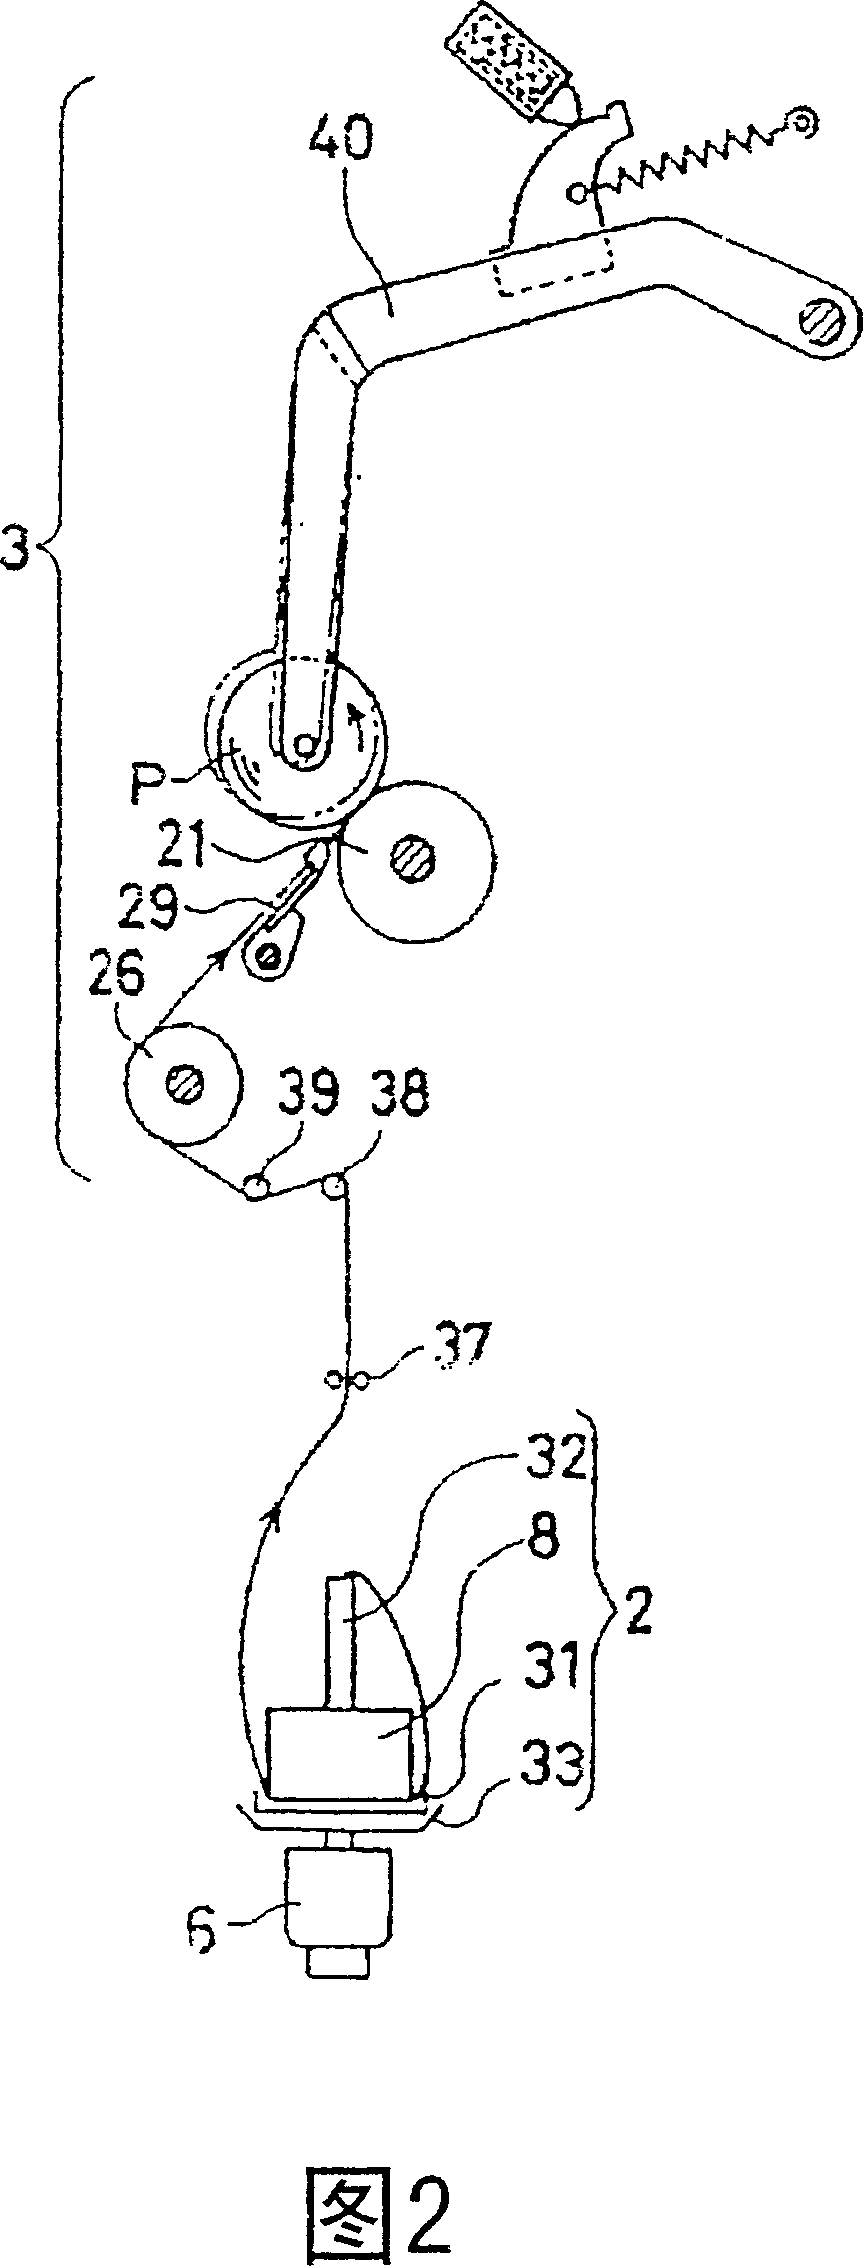 Individual-spindle-drive type textile machine